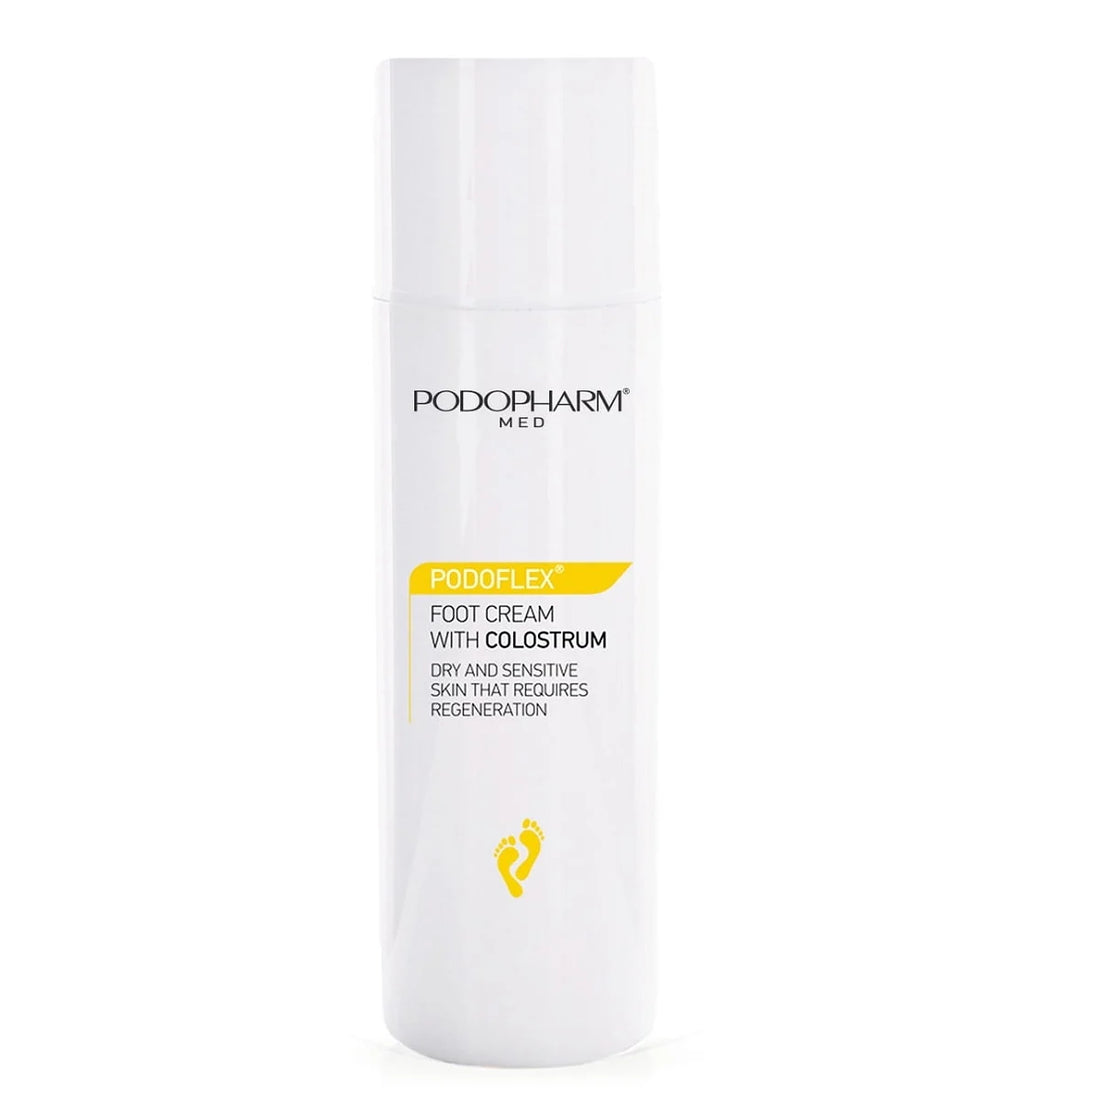 Podopharm Med Podoflex Foot Cream With Colostrum For Dry And Sensitive Skin That Requires Regeneration Airless 150ml Podopharm